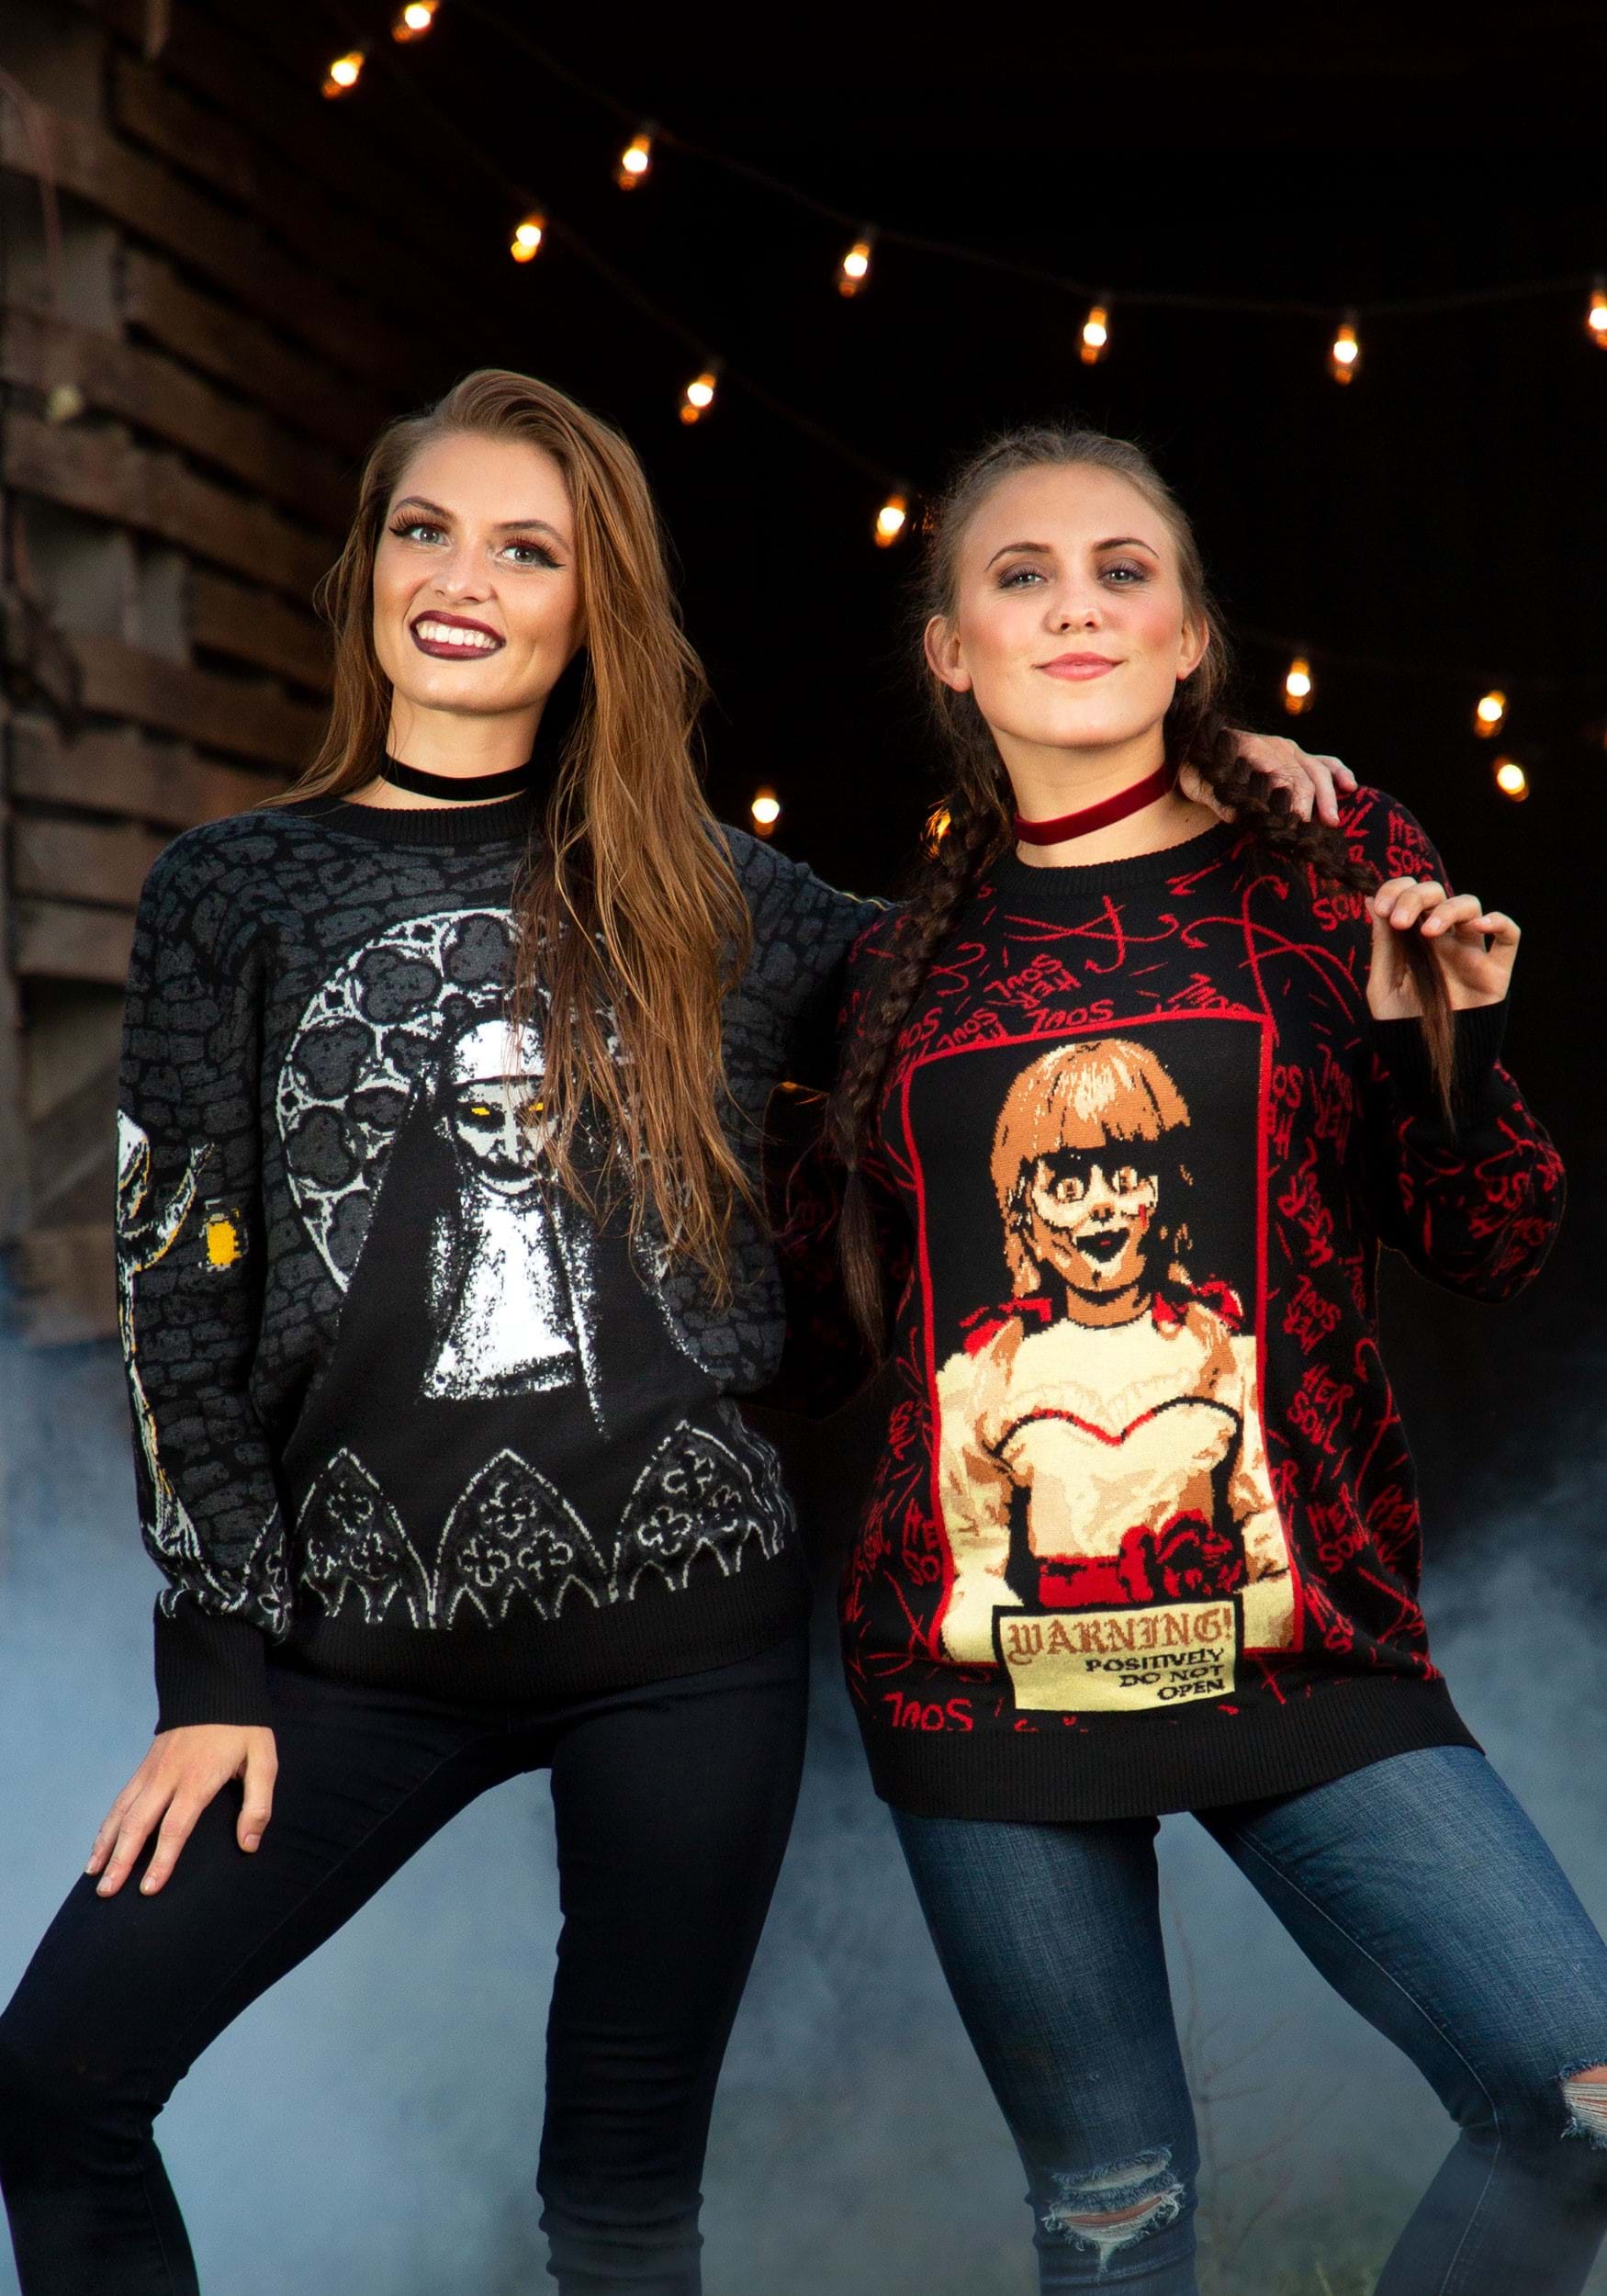 Adult Annabelle Ugly Sweater , Ugly Halloween Sweaters